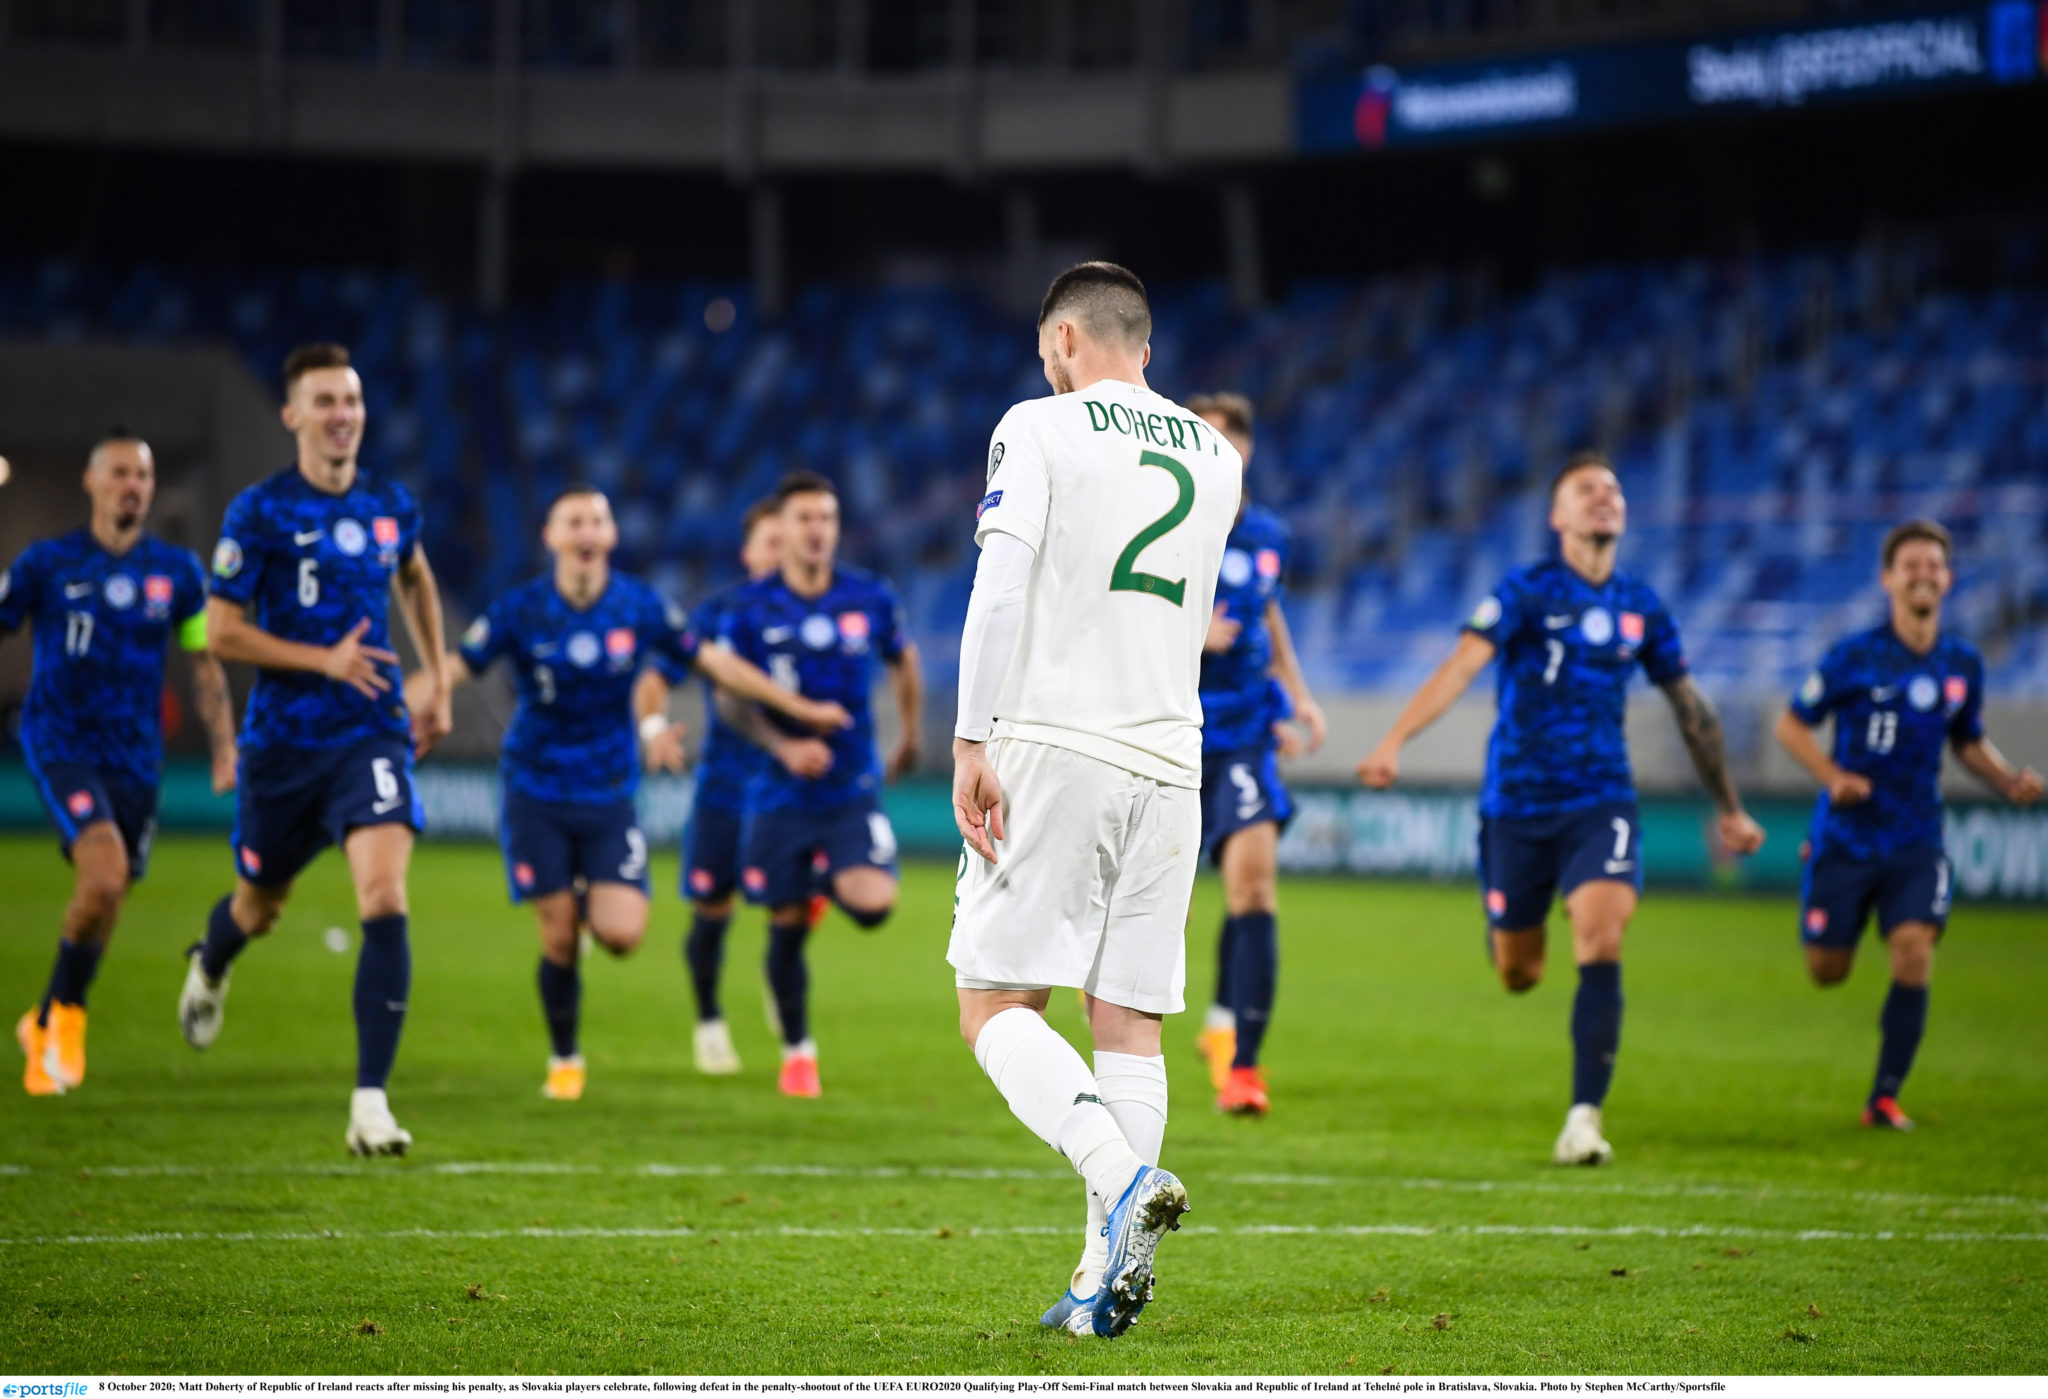 Matt Doherty after missing the penultimate penalty during Ireland's shoot-out loss to Slovakia